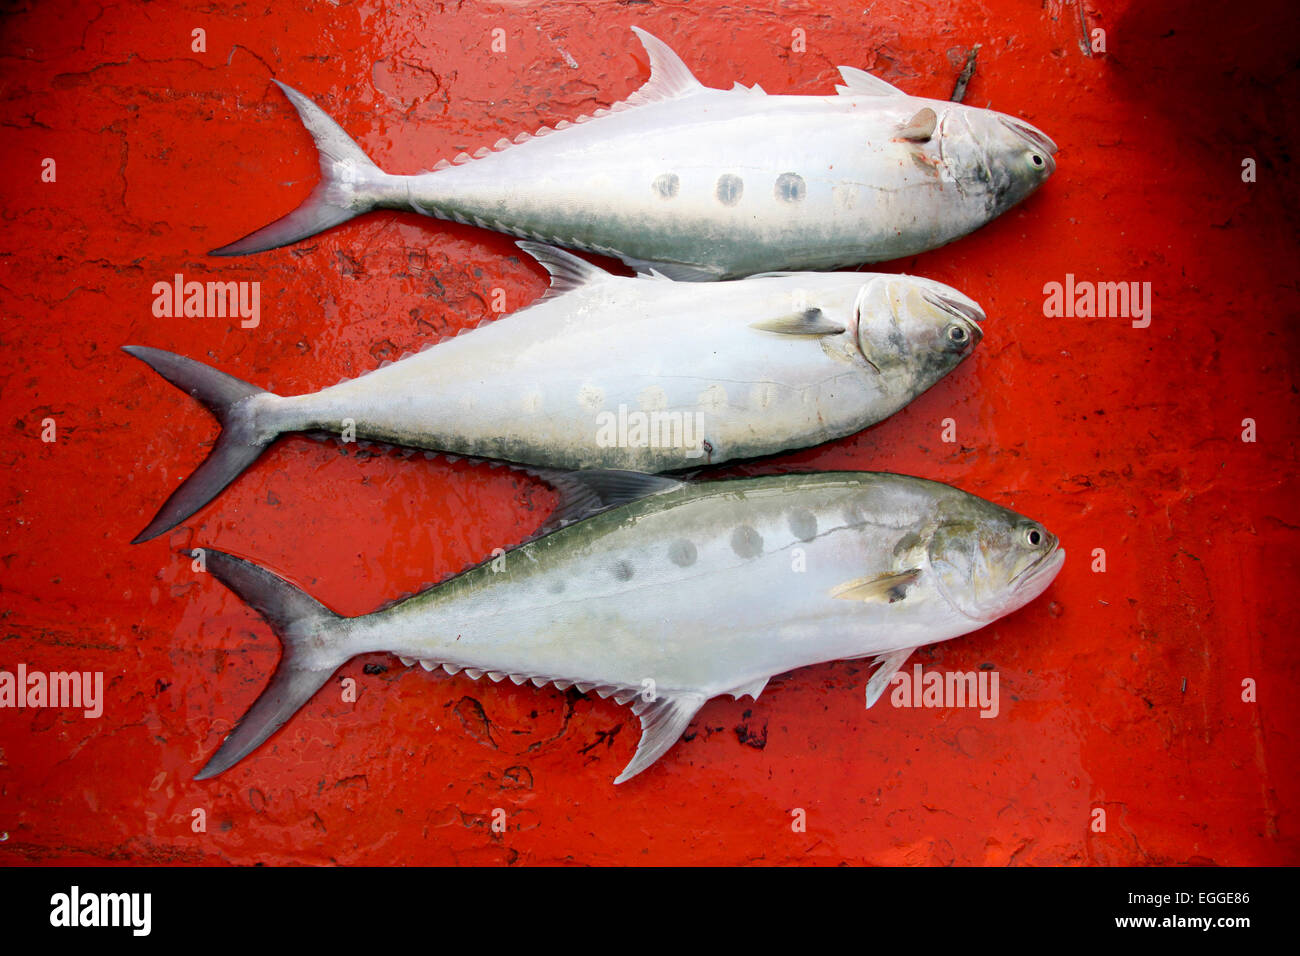 Tropical marine fish caught on a boat in Thailand. Stock Photo